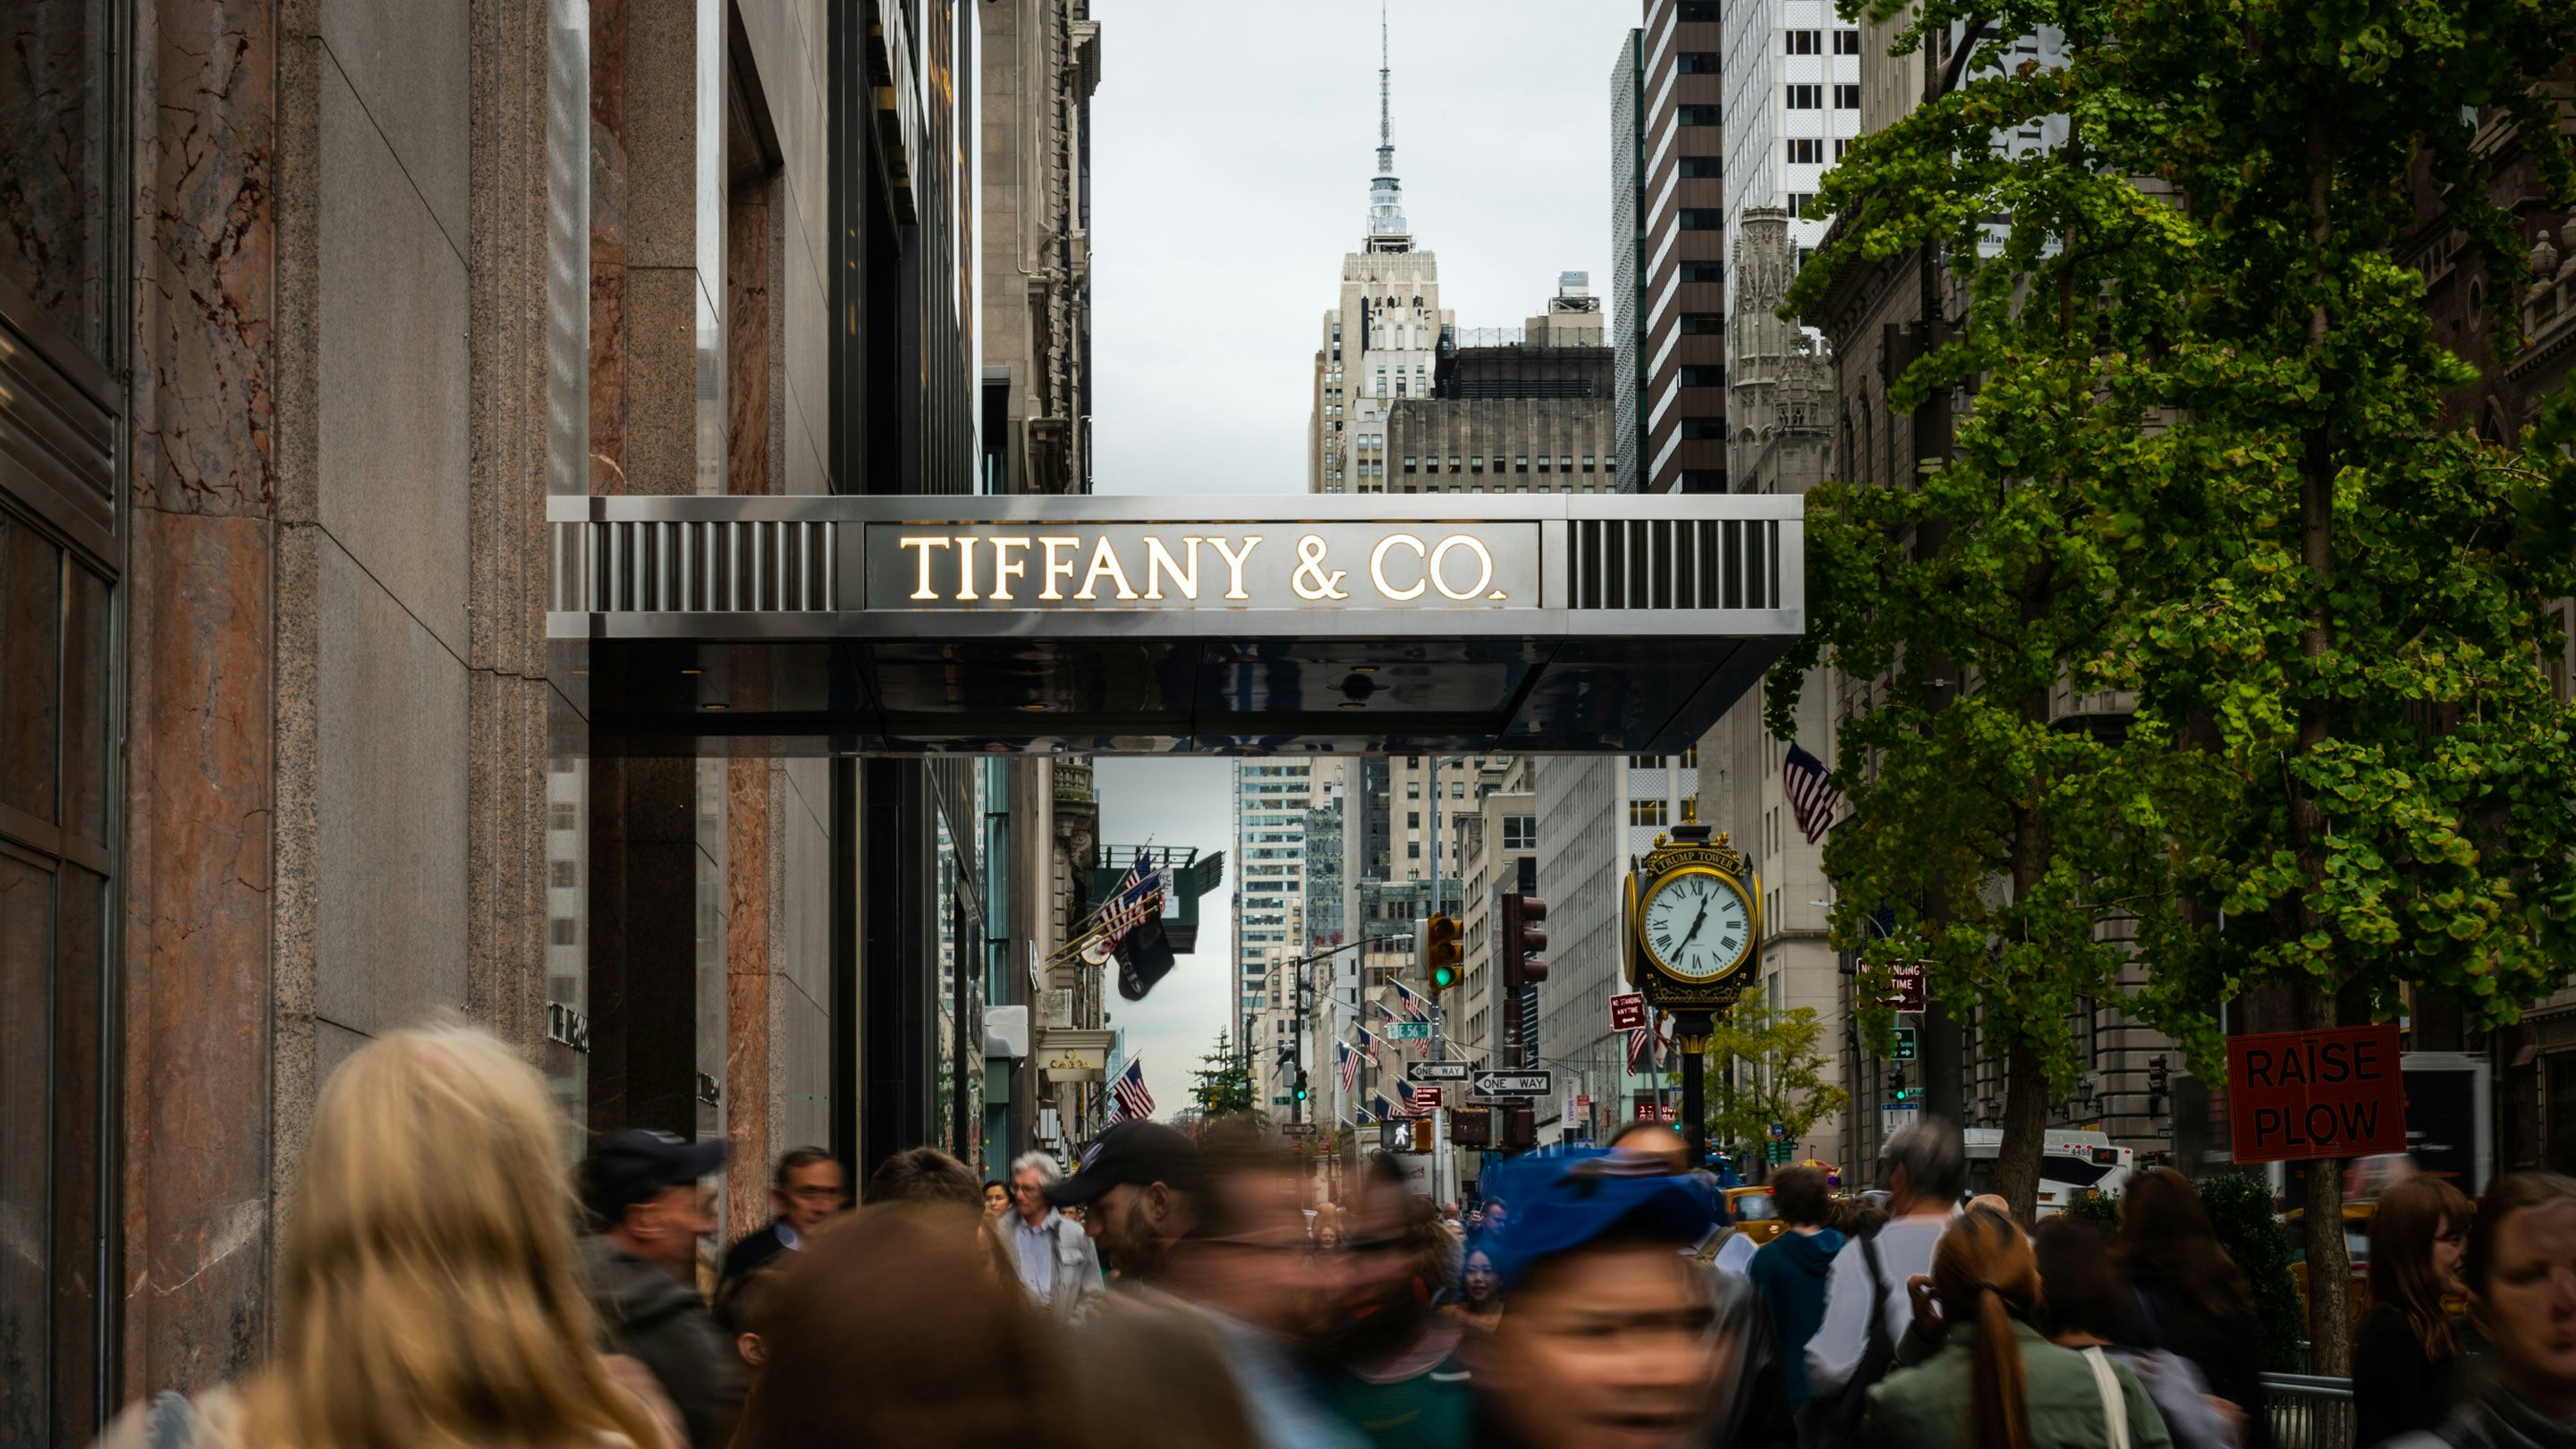 The impact of the acquisition of Tiffany & Co. on the financial